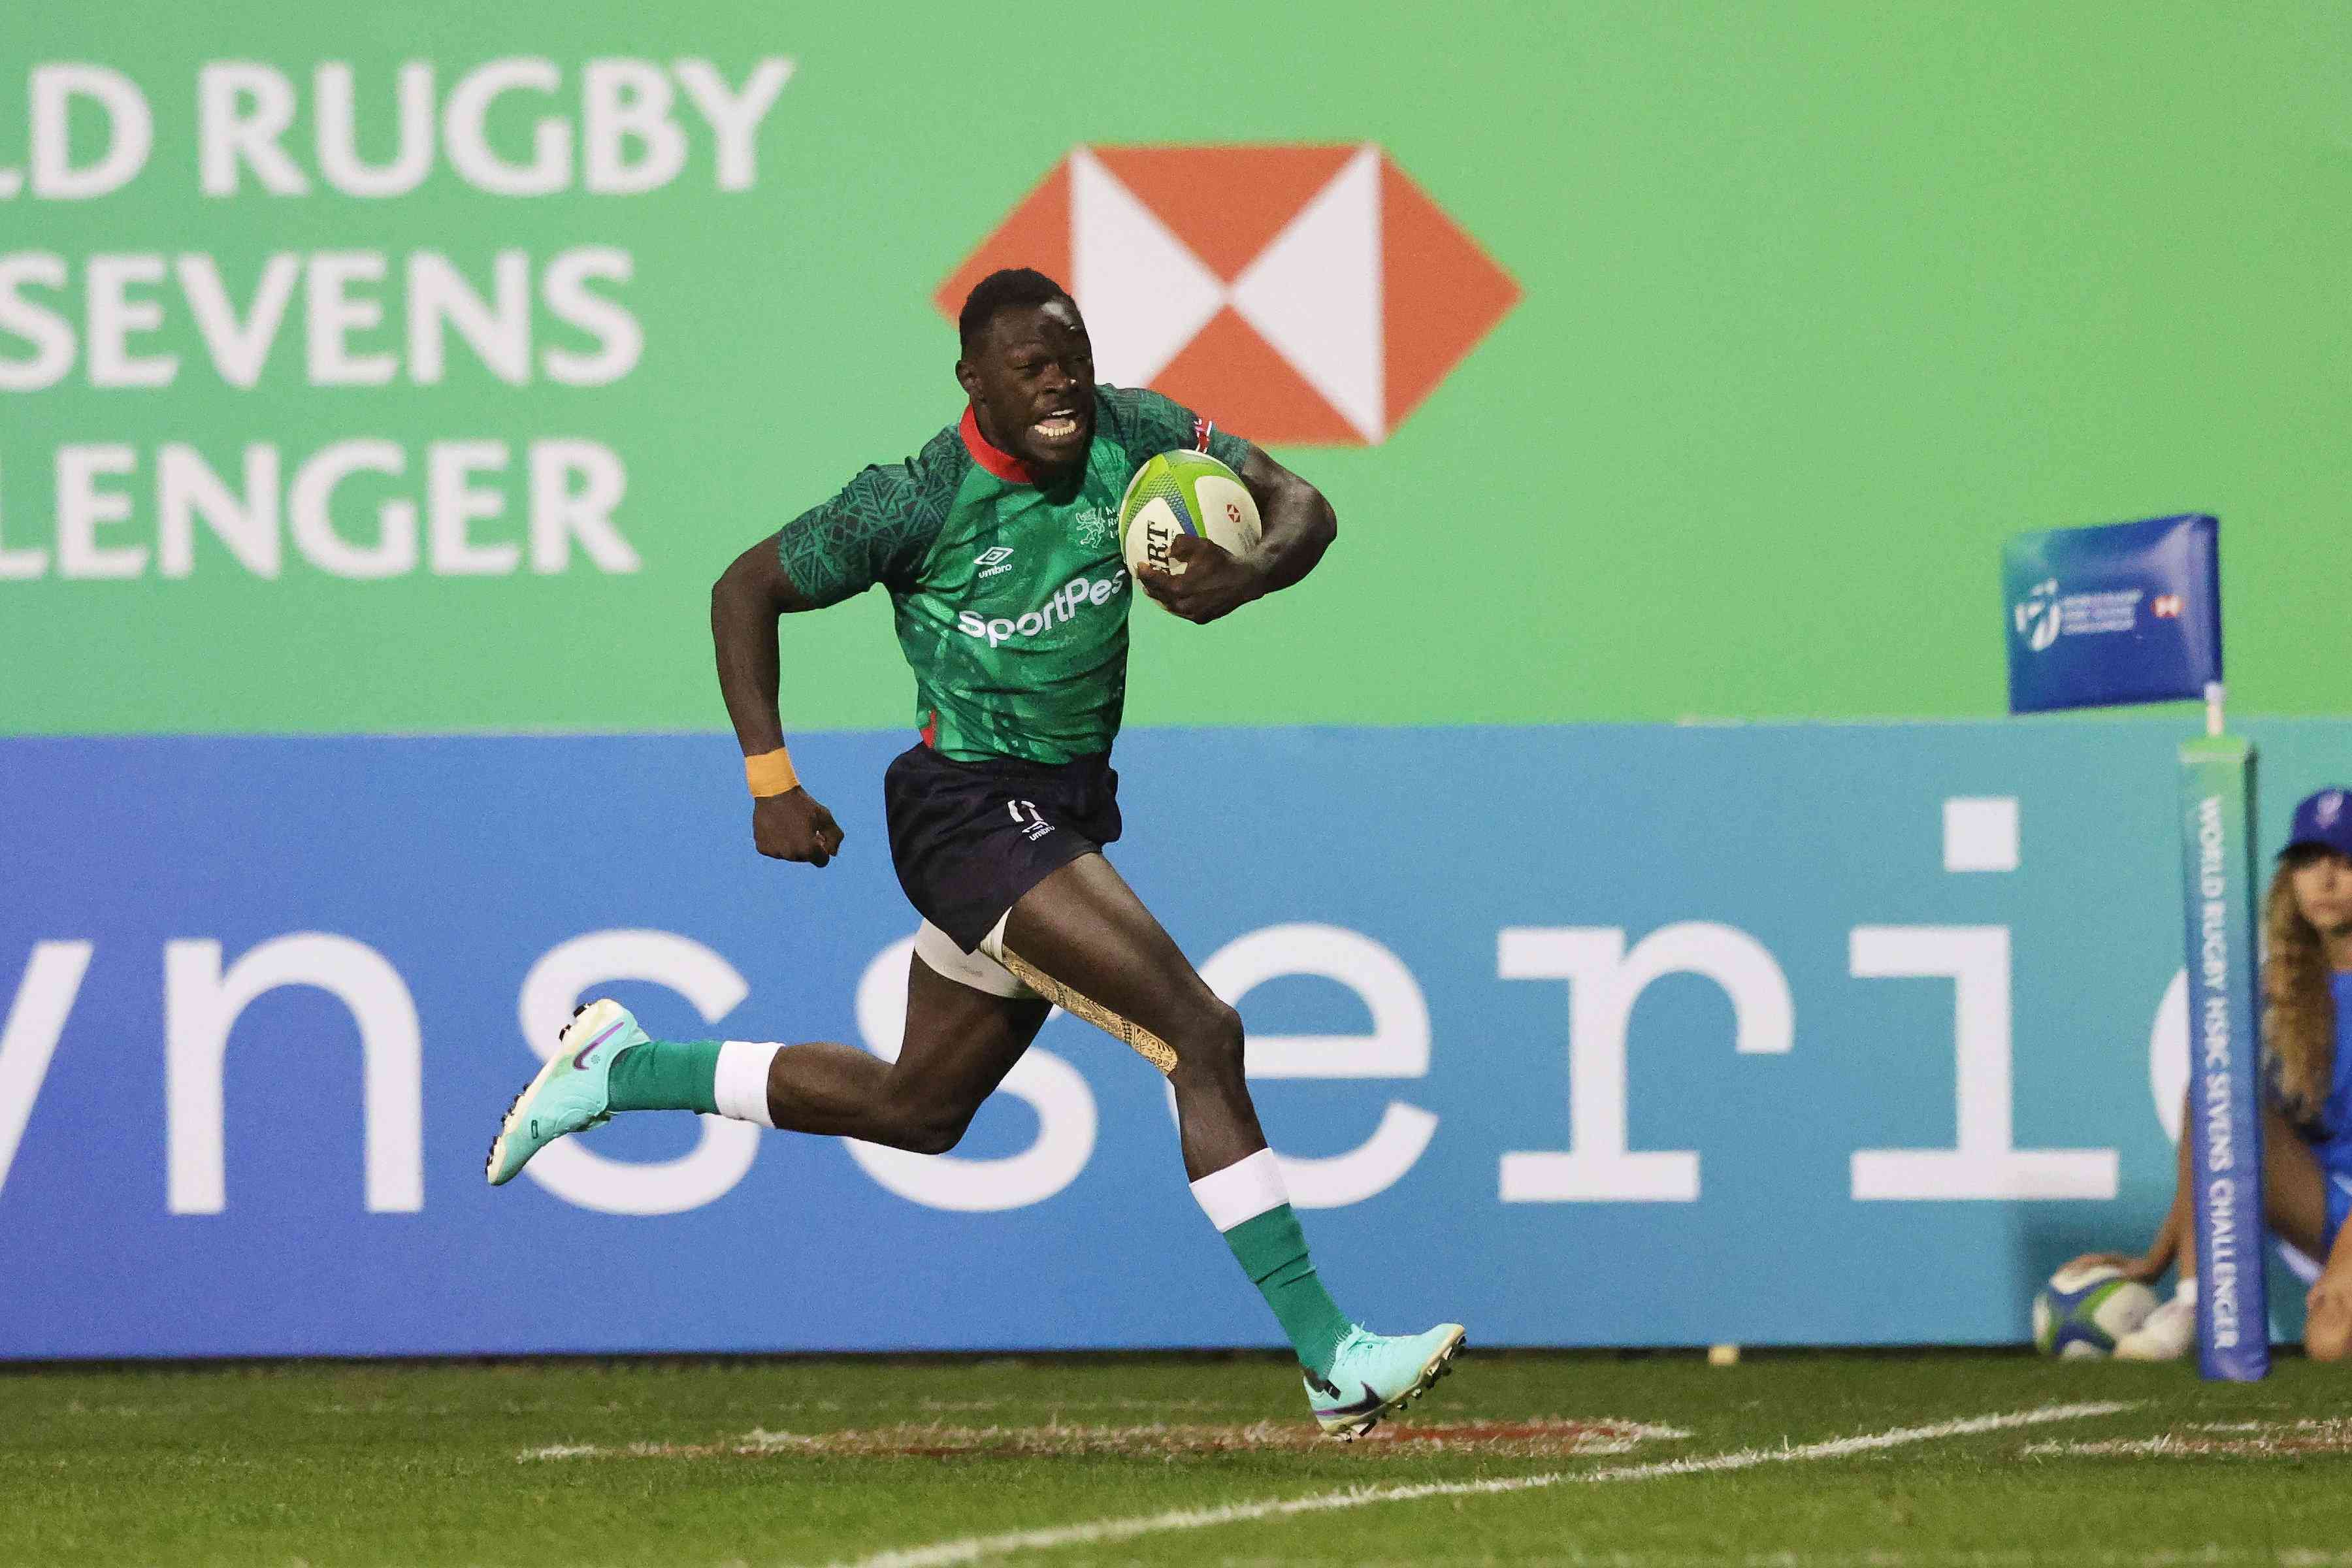 Shujaa, Lionesses glide into World Rugby Sevens Challenger Series finals